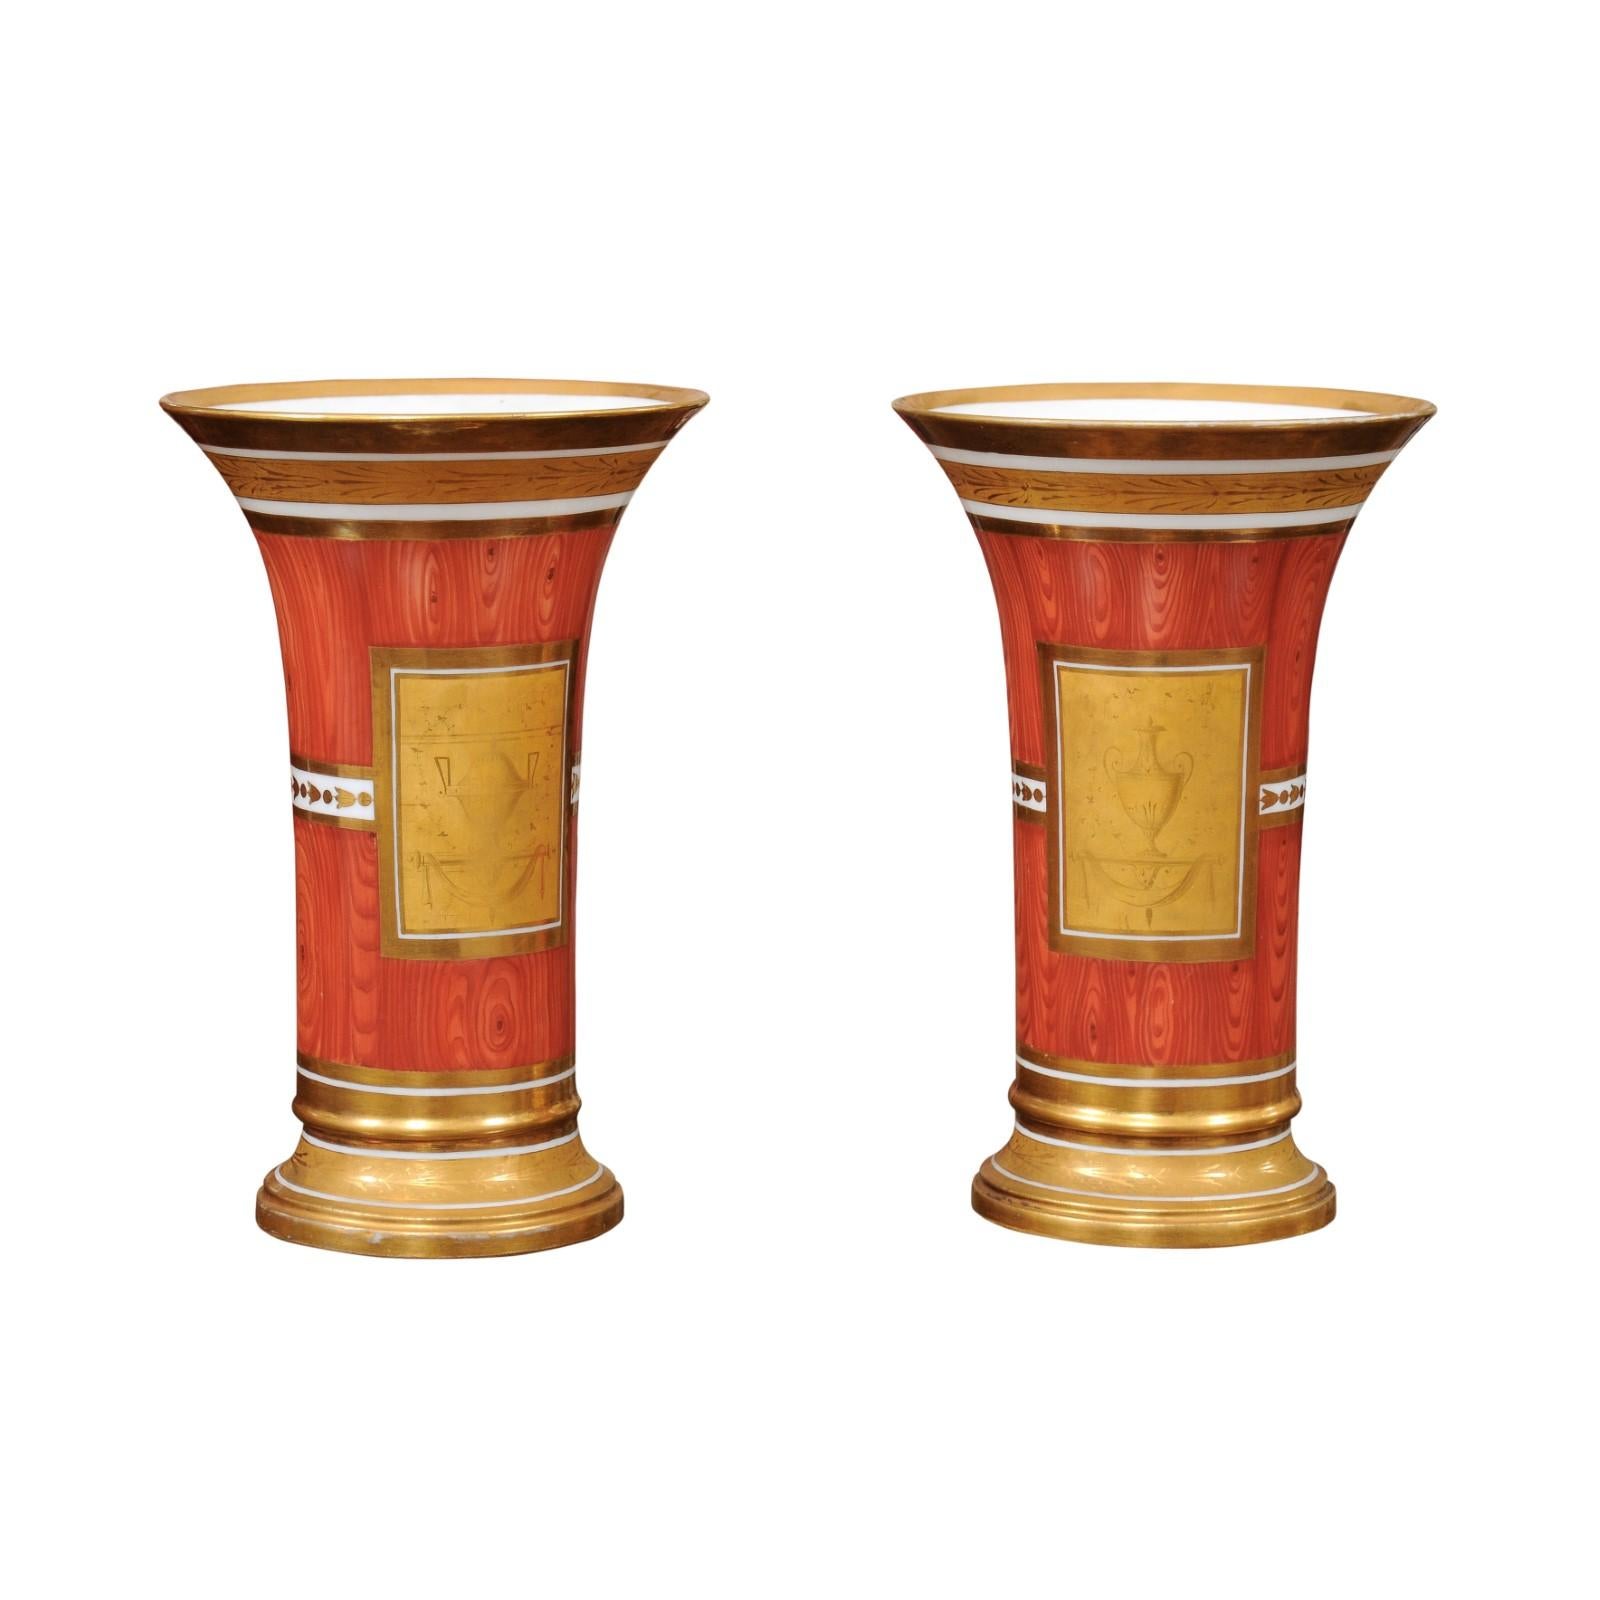 Pair of Continental Orange Faux Bois & Gilt Vases with Neoclassical Motif For Sale 2